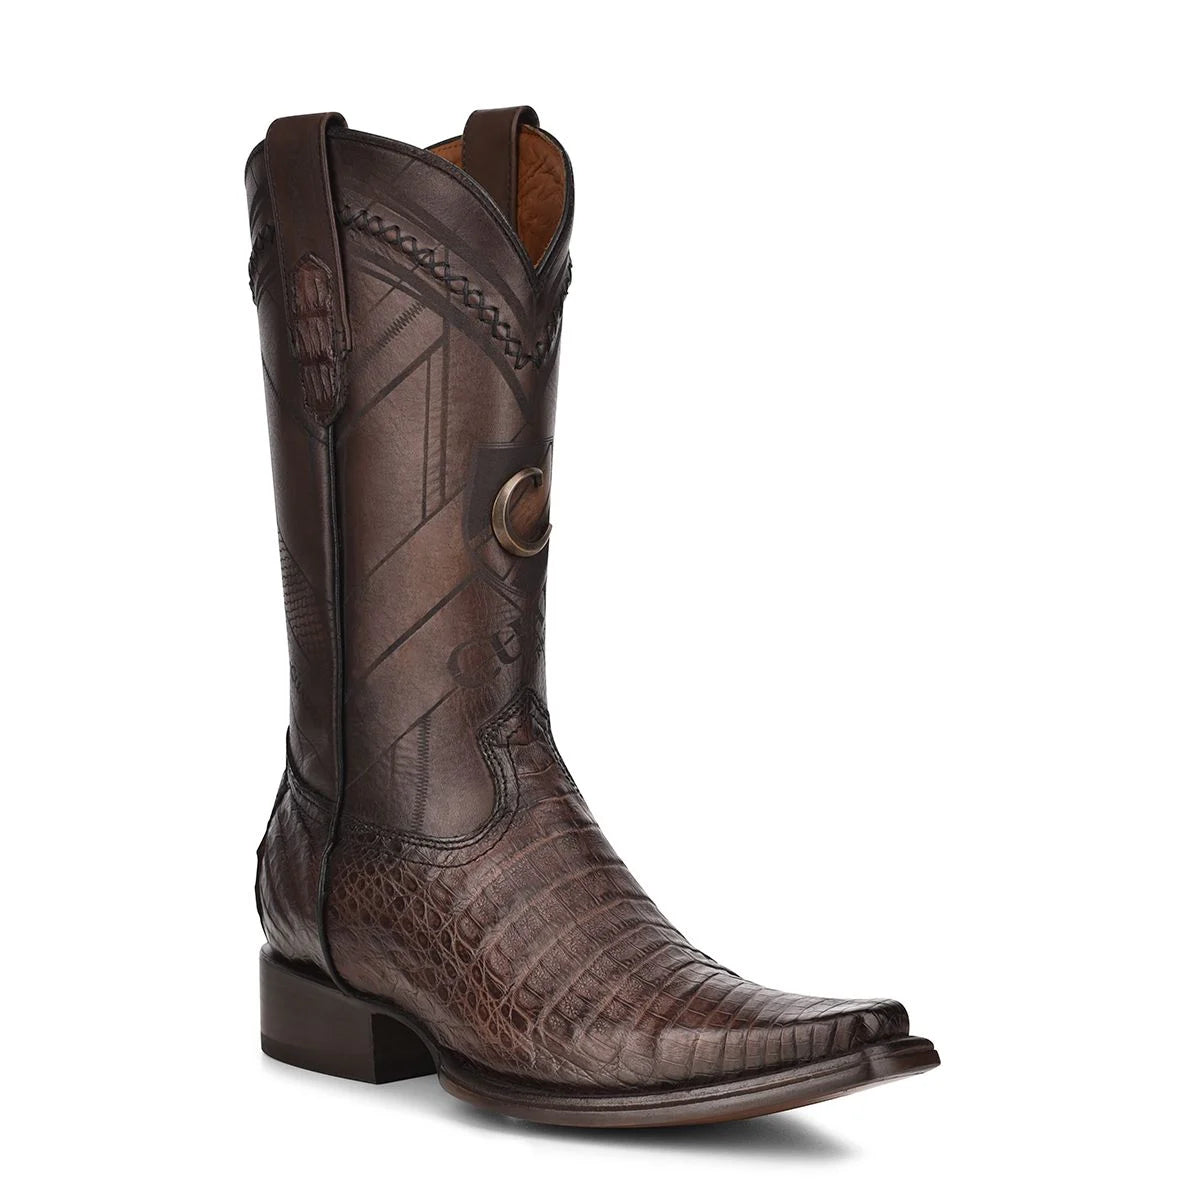 Exotic cayman Fucus leather boots